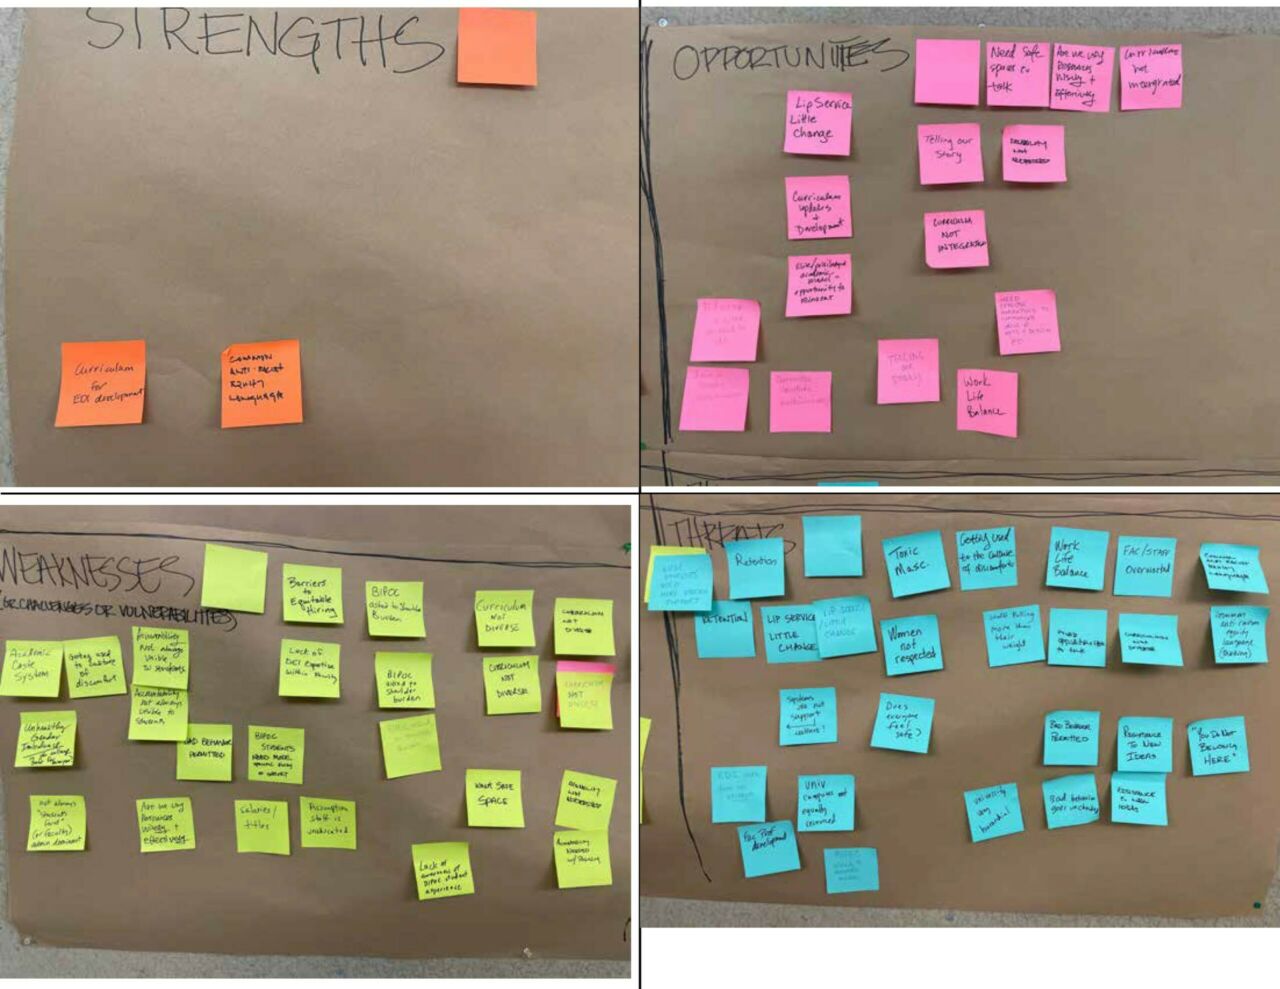 A series of brightly colored post-it notes attached to quadrants labeled Strengths, Weaknesses, Opportunities, and Threats. The majority of notes are in the weaknesses and threats quadrants.